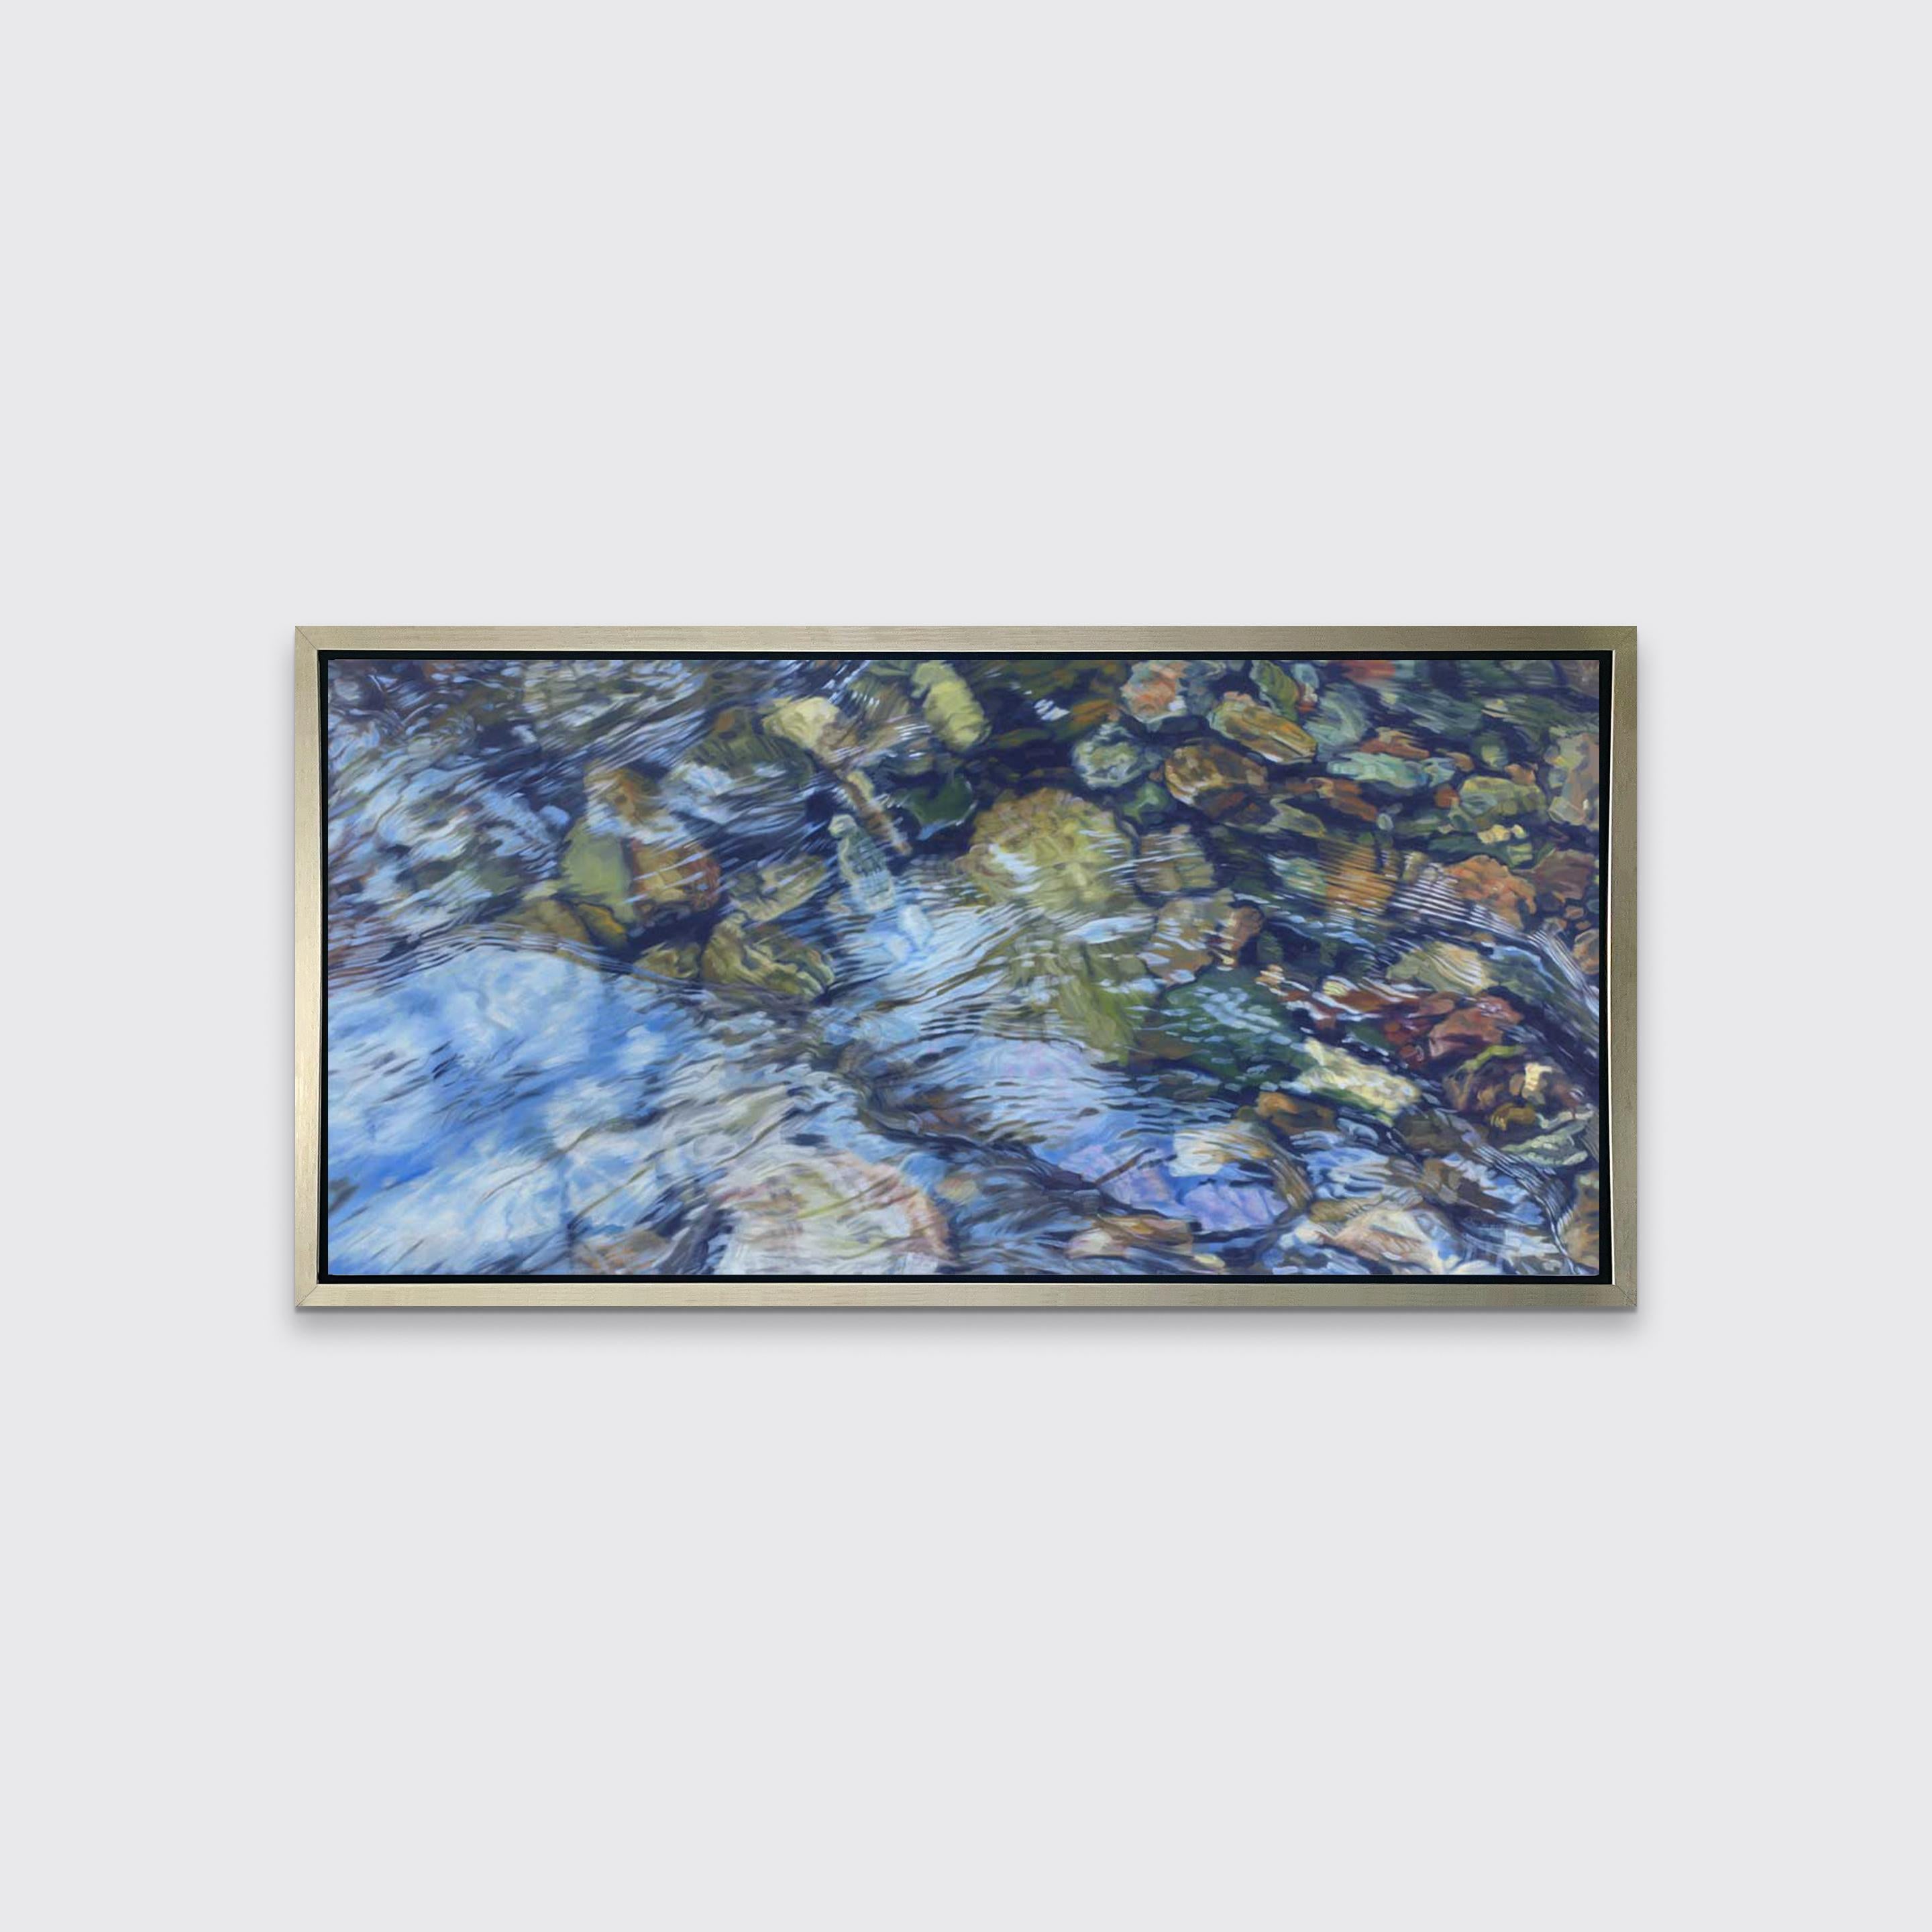 This realistic limited edition print captures highly detailed, close up view of river water running over small, colorful rocks. Above the shapes, textures, and earthy colors of the rocks, the water reflects the light above it. Filled with abstract